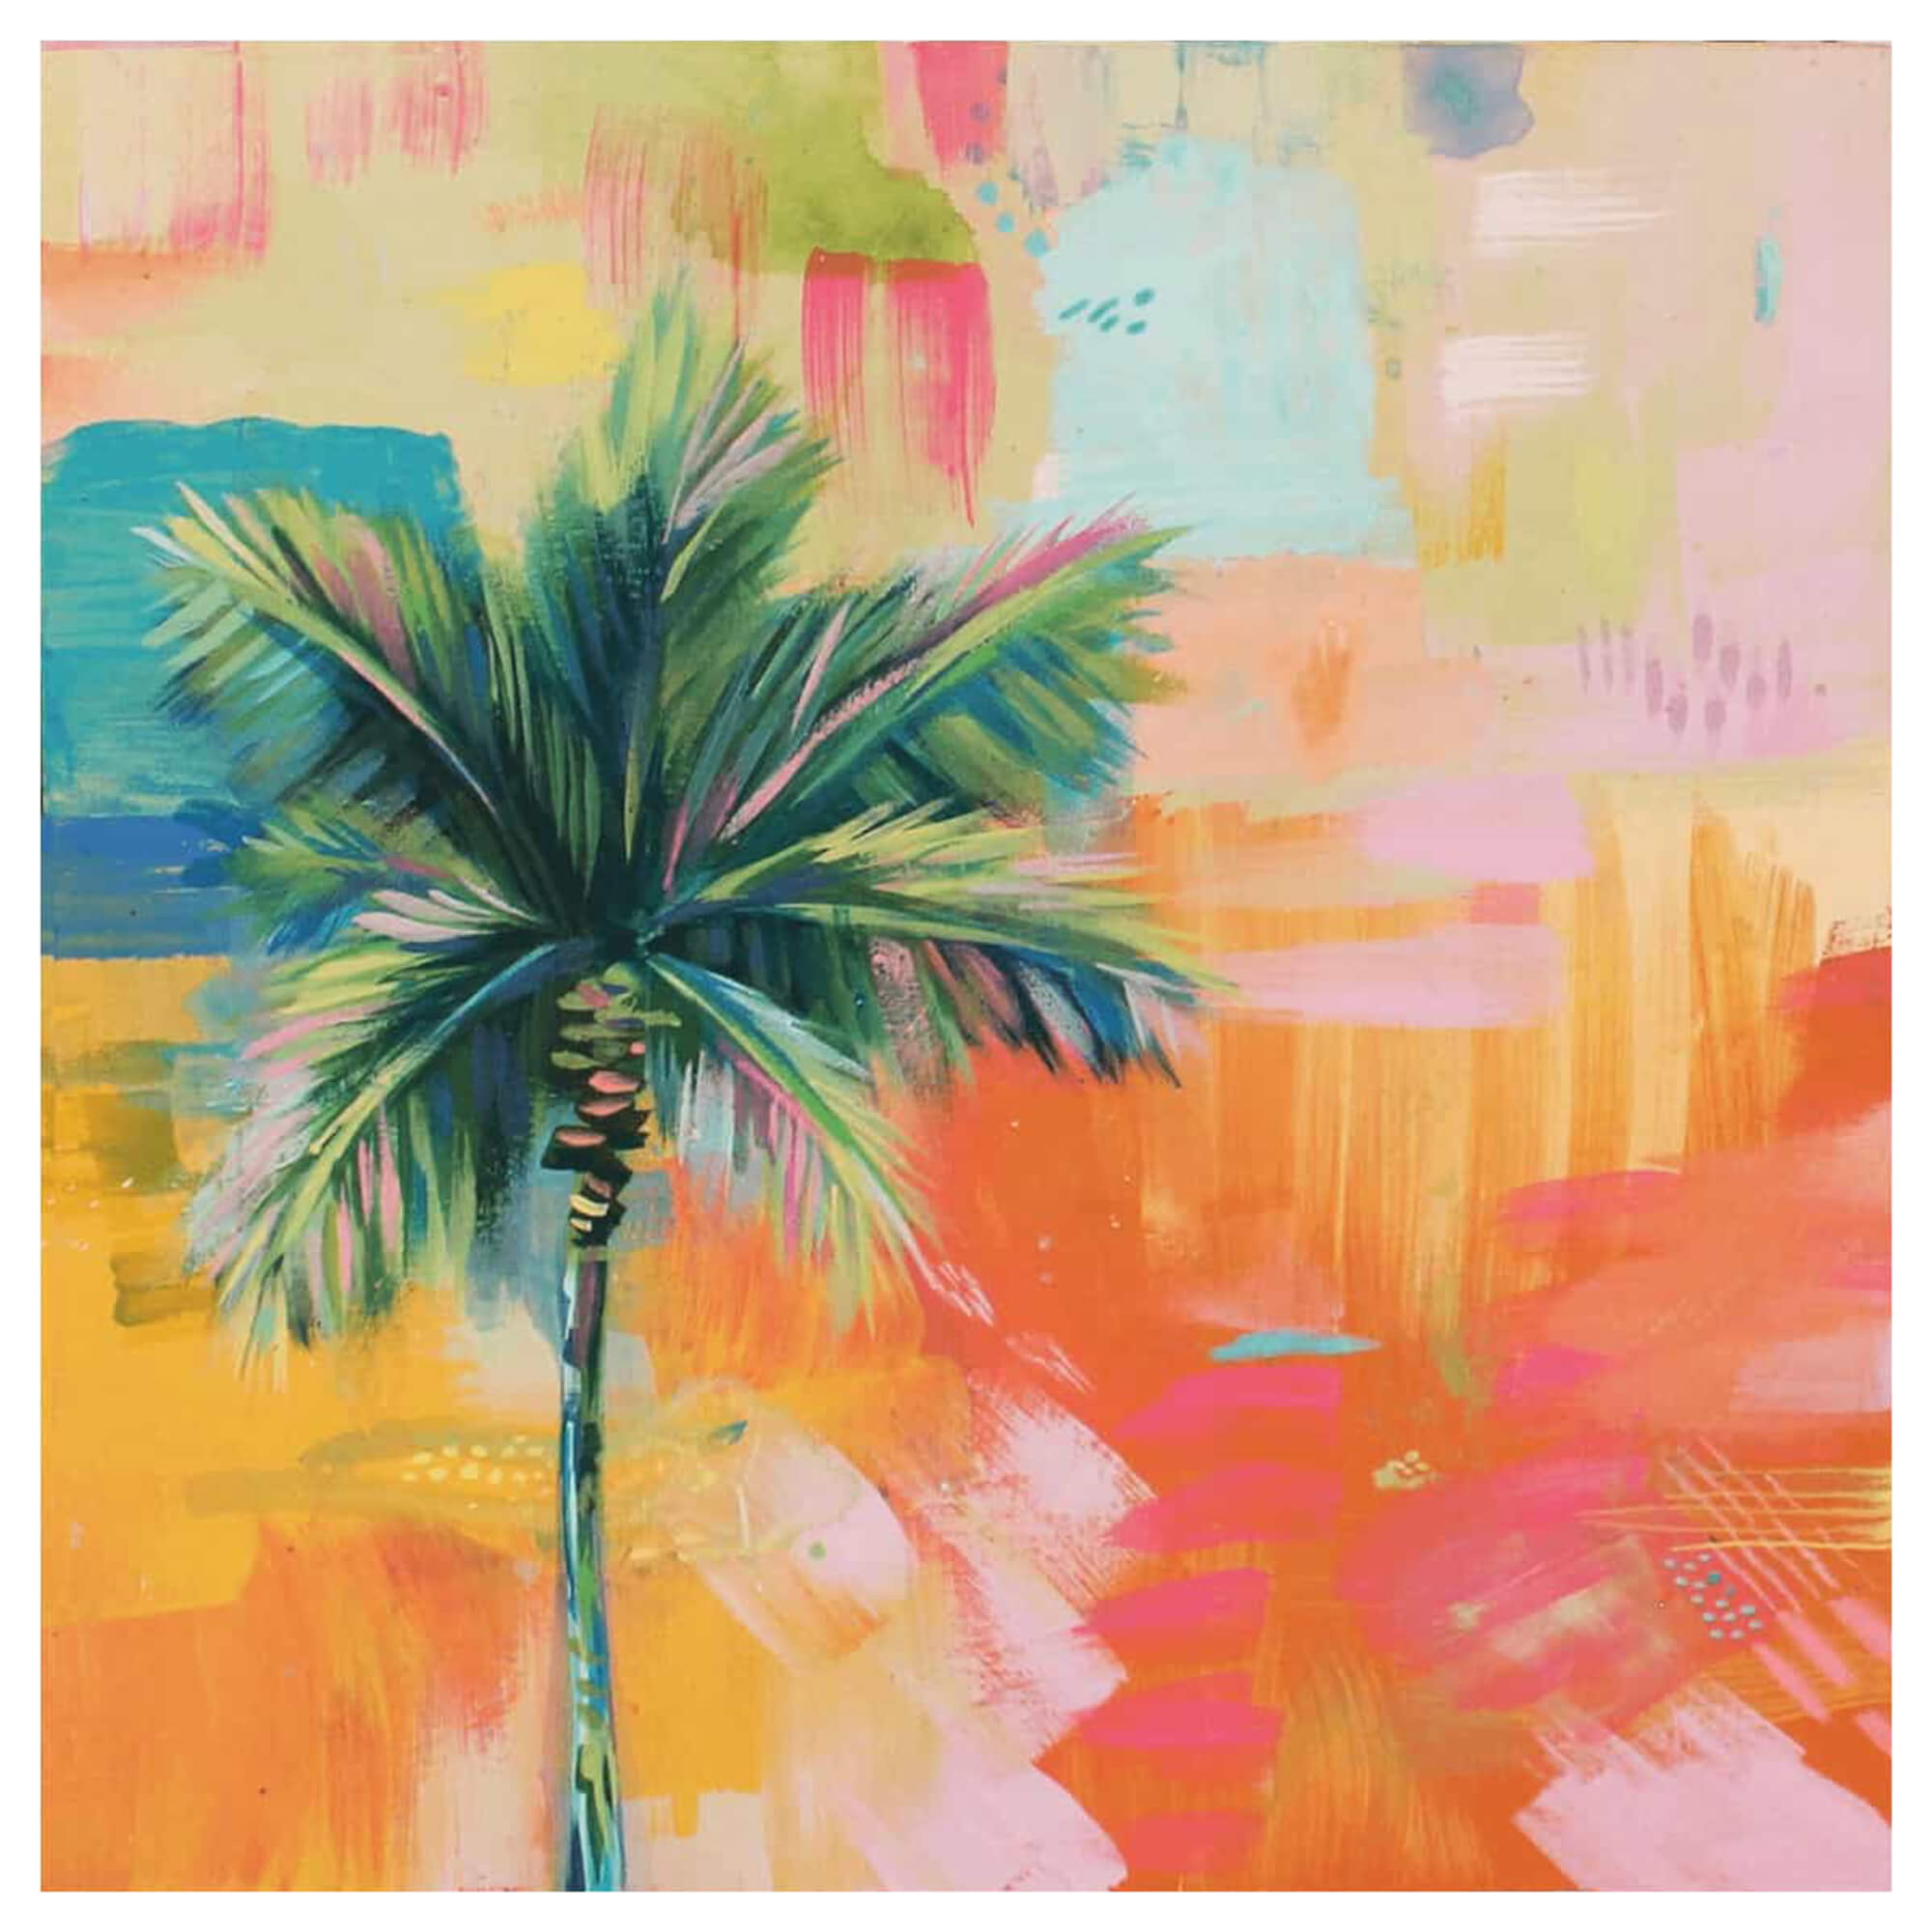 A bamboo art print of a palm tree against an orange, pink and blue multi-layered backdrop by Hawaii artist Lauren Roth